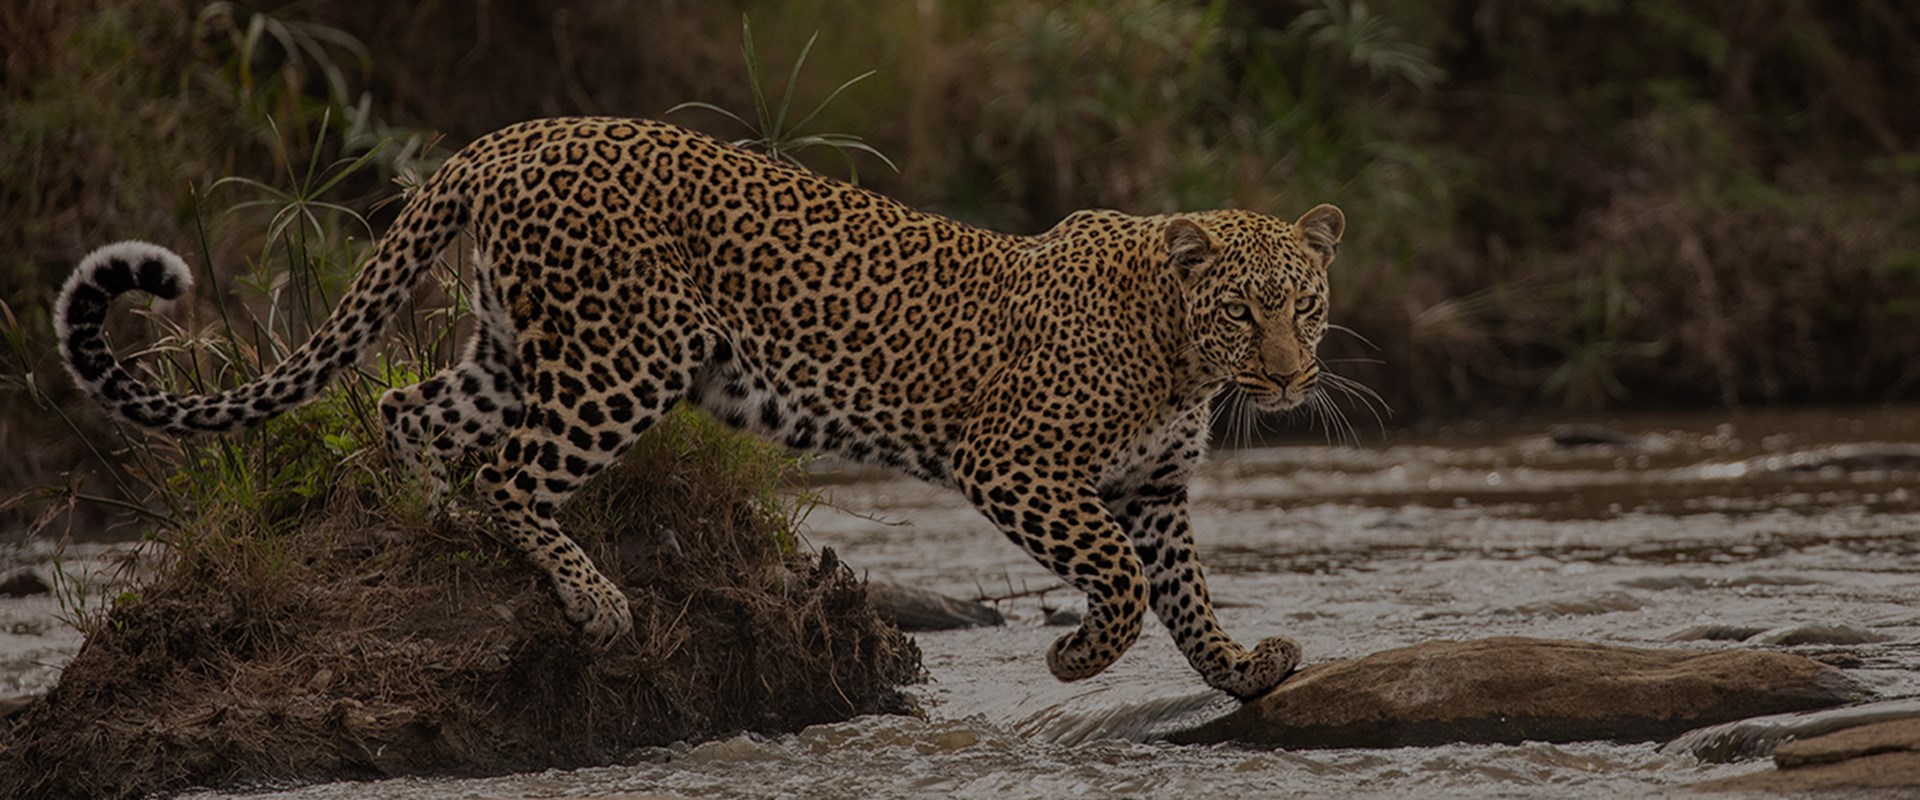 A moment of eye contact with a leopard as it curls its tail, while striding over water.